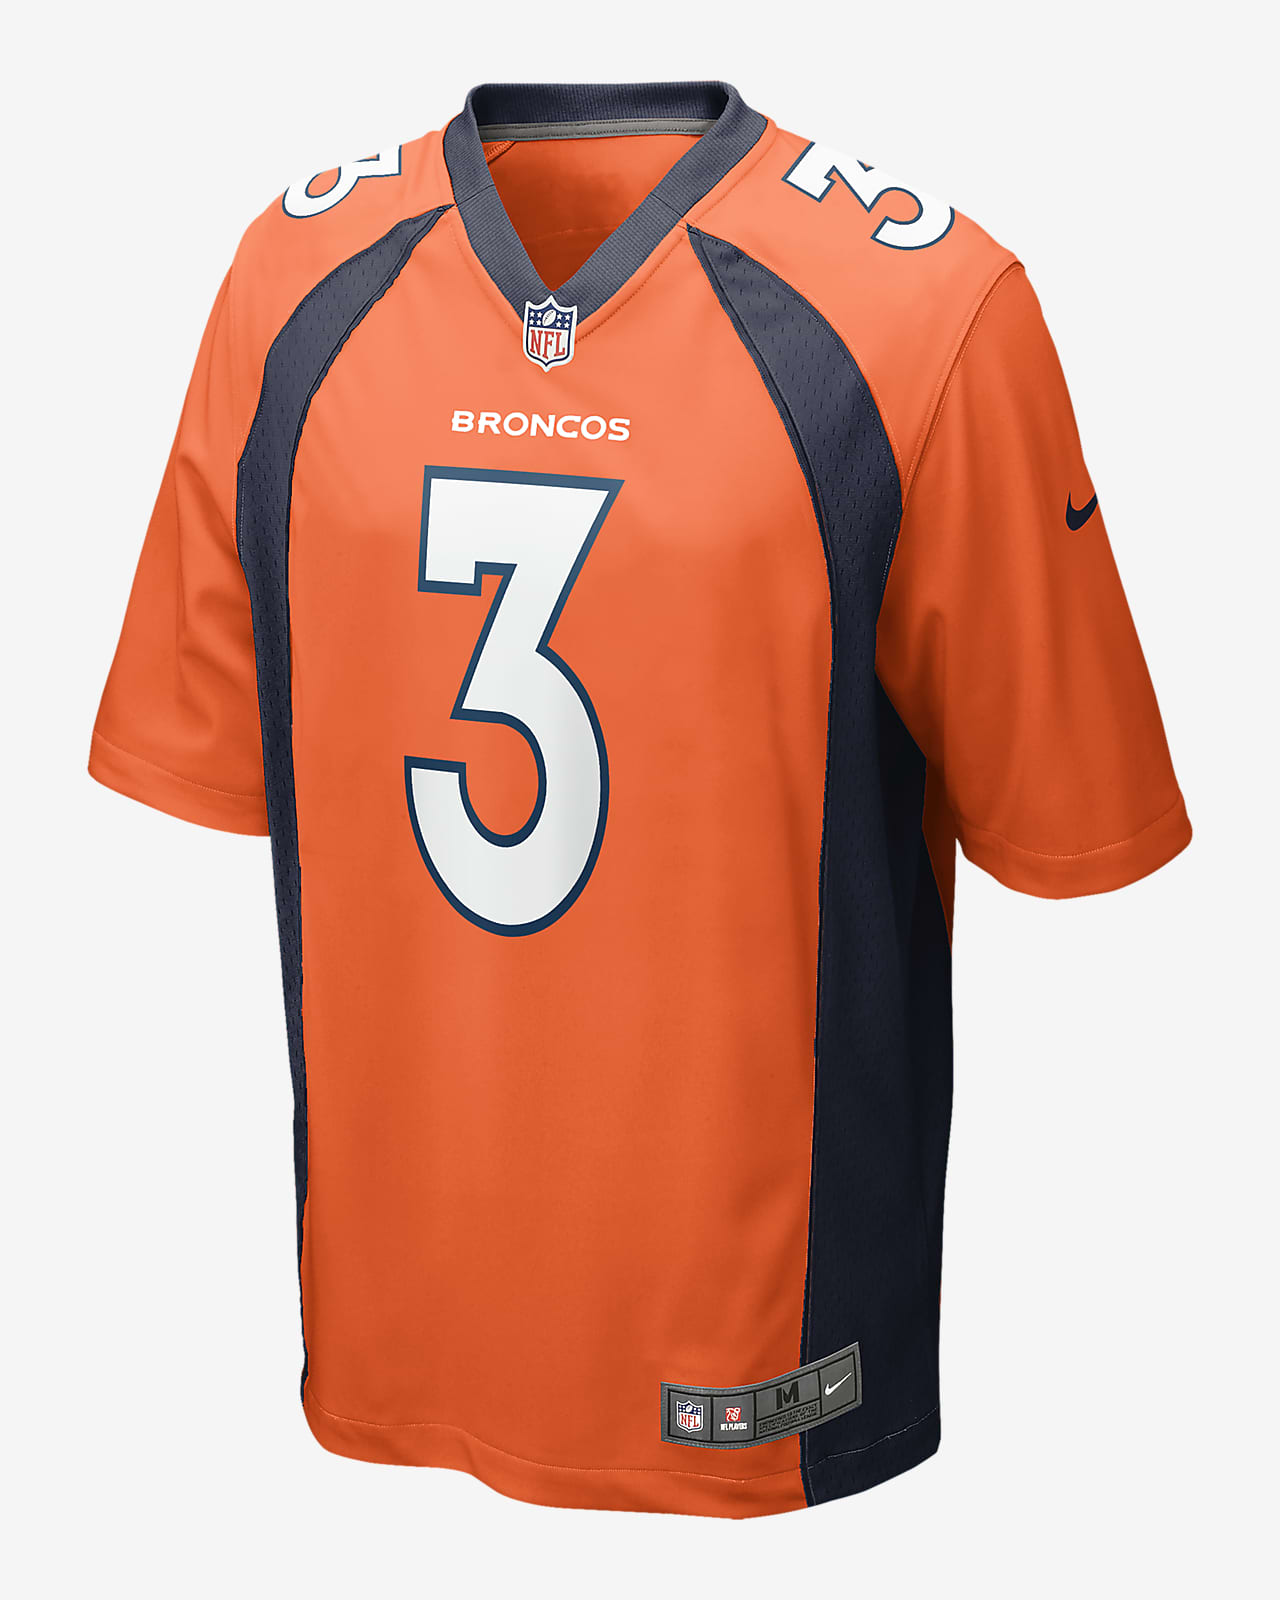 where to buy russell wilson jersey